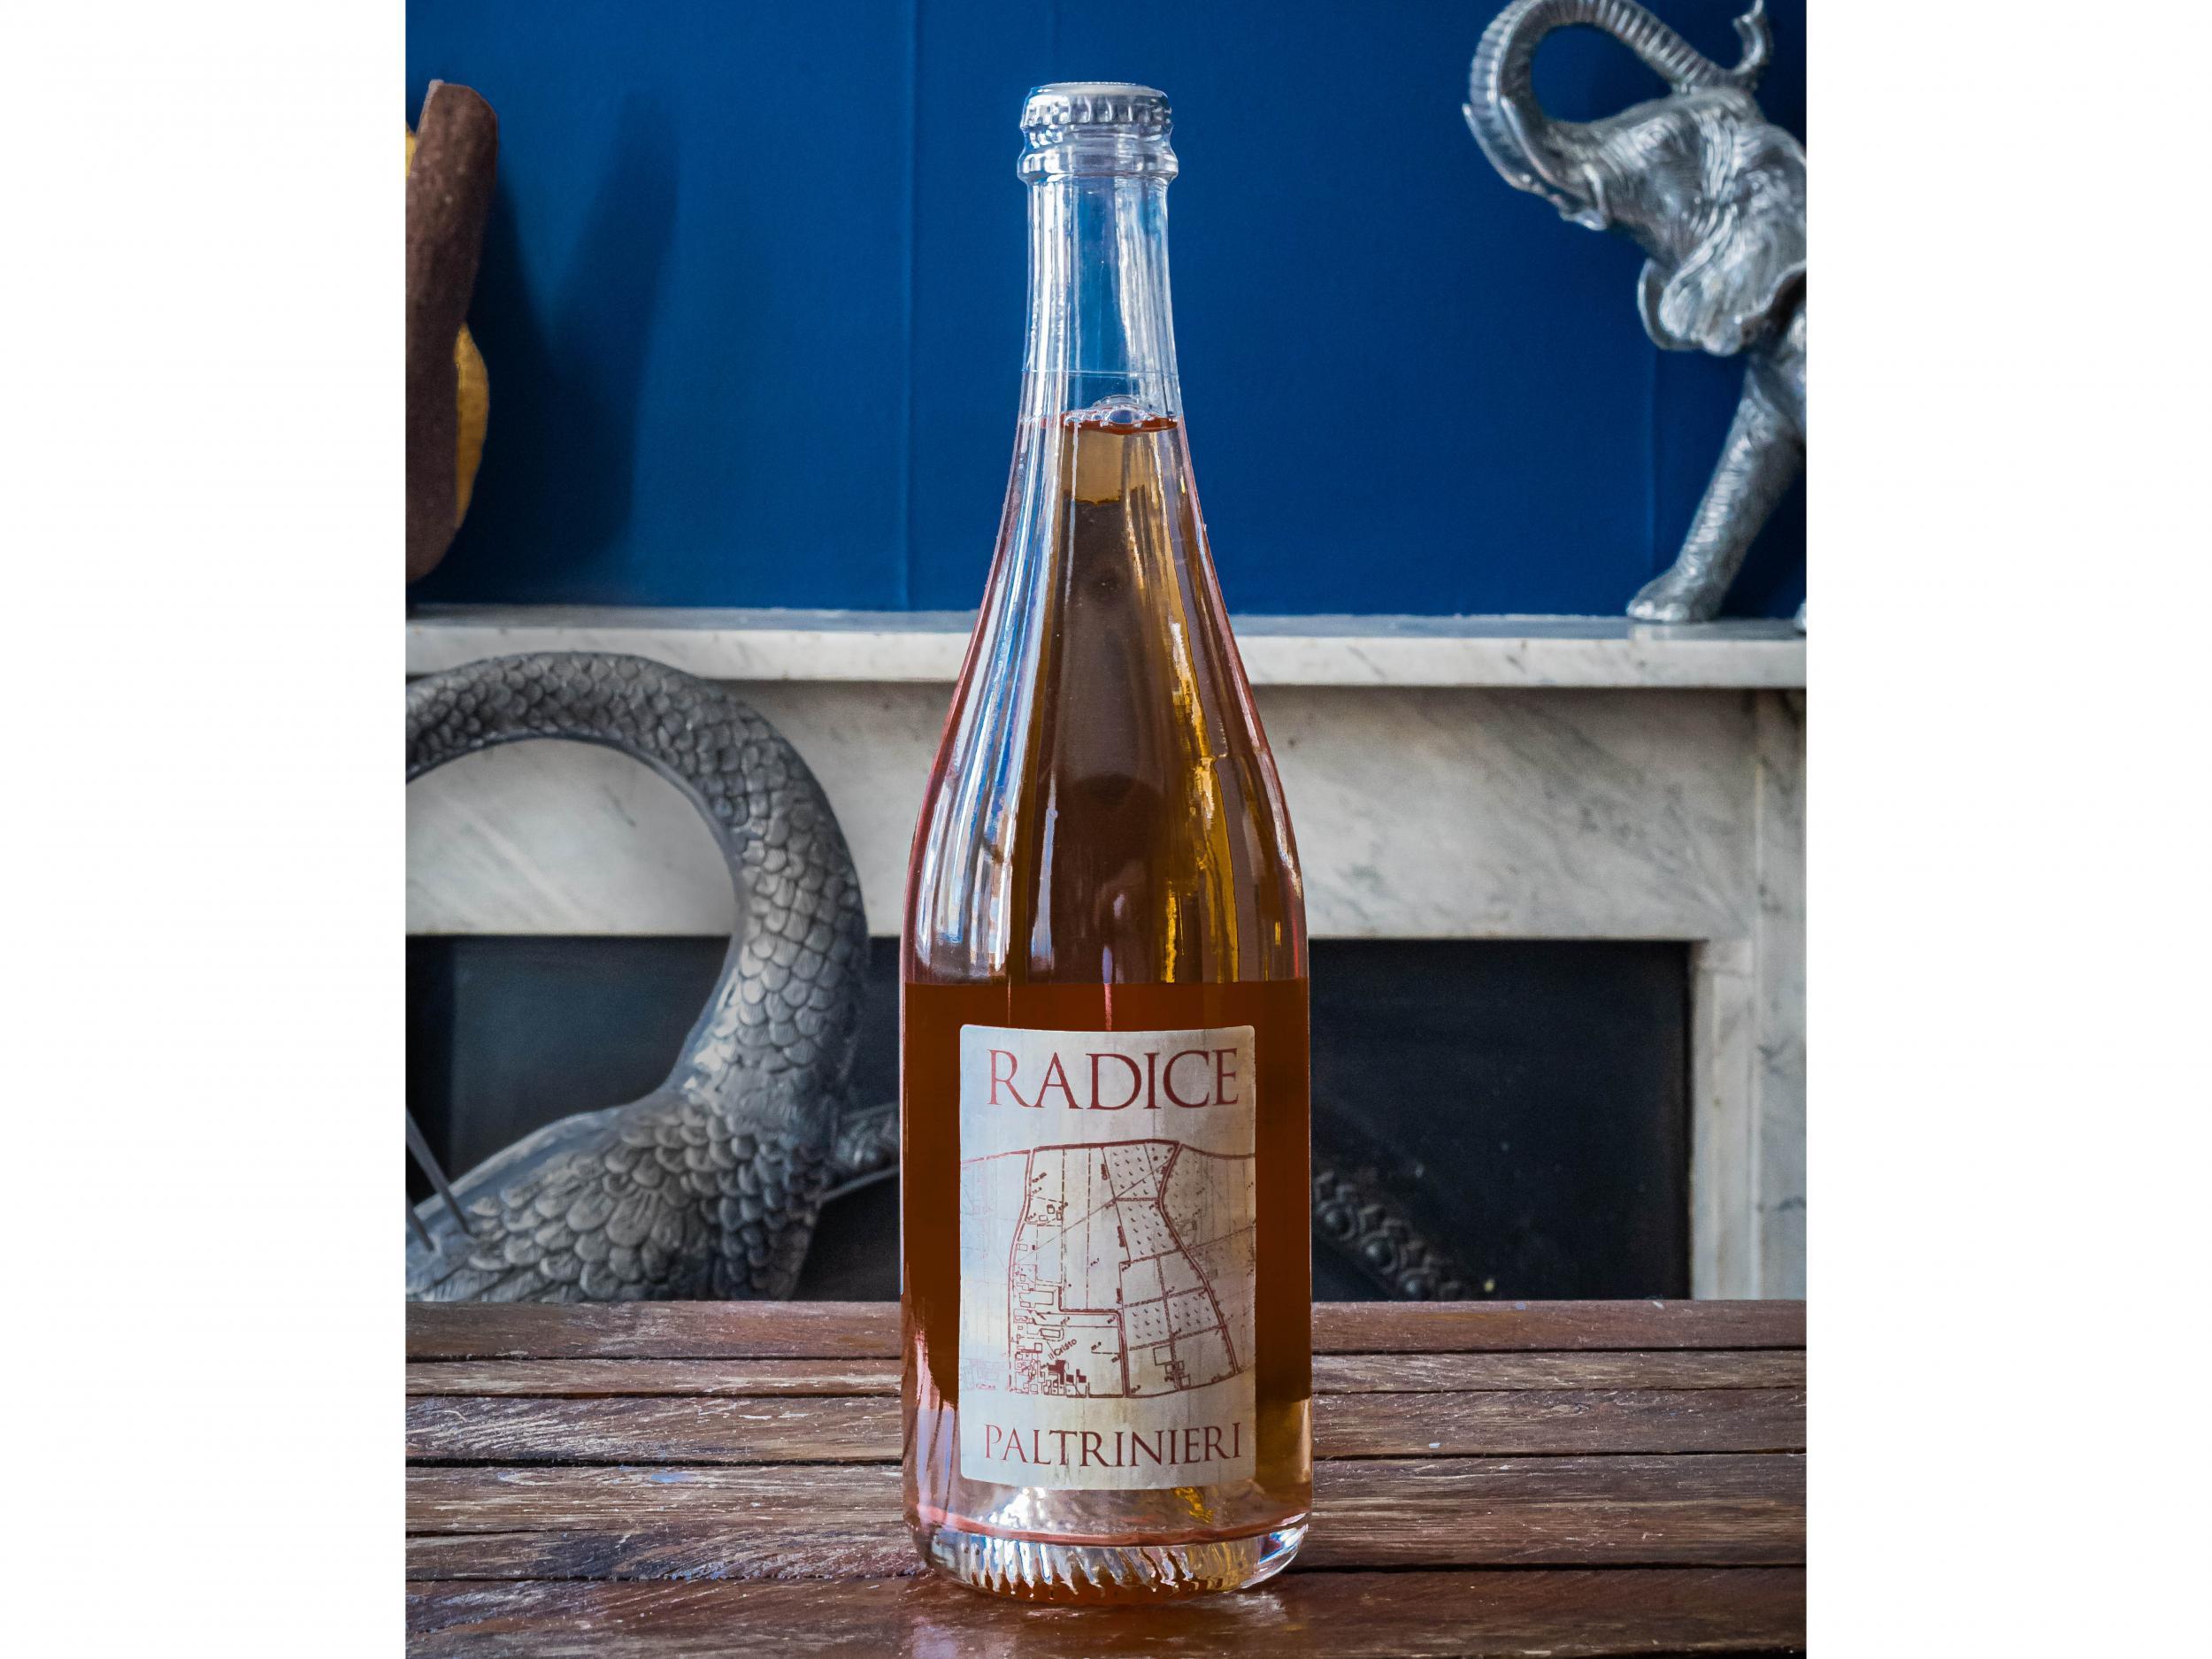 ‘Cheaply made versions meant that it was once known as a student’s drink’, says Luca Dusi, owner of Passione Vino wine shop, which are far removed from bottles like this one (Francis Payne)